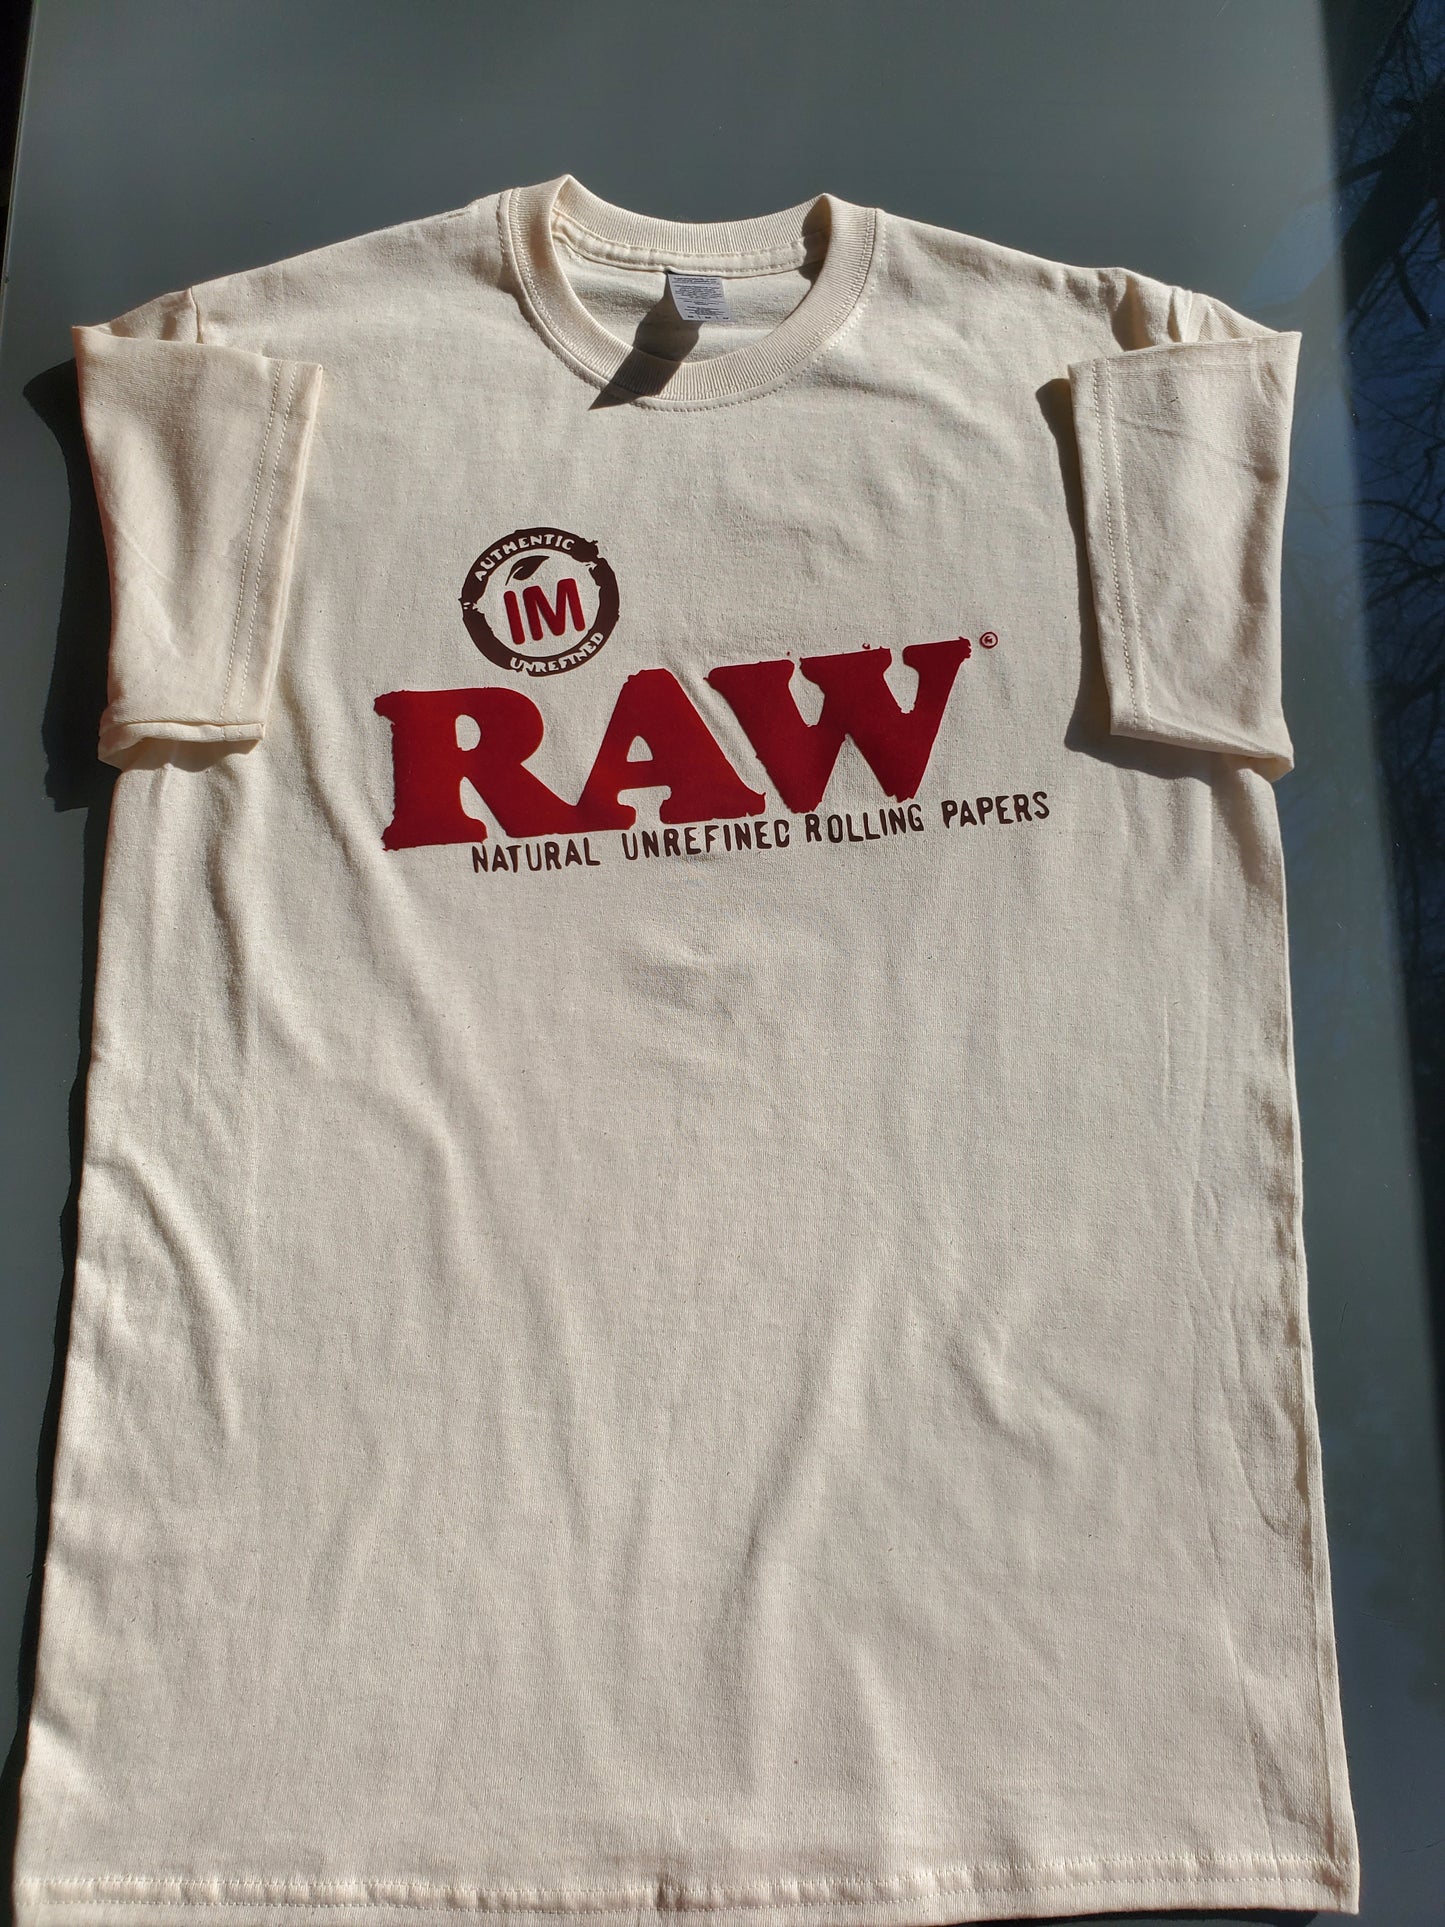 Im Raw T-Shirt - Centre Ave Clothing Co.